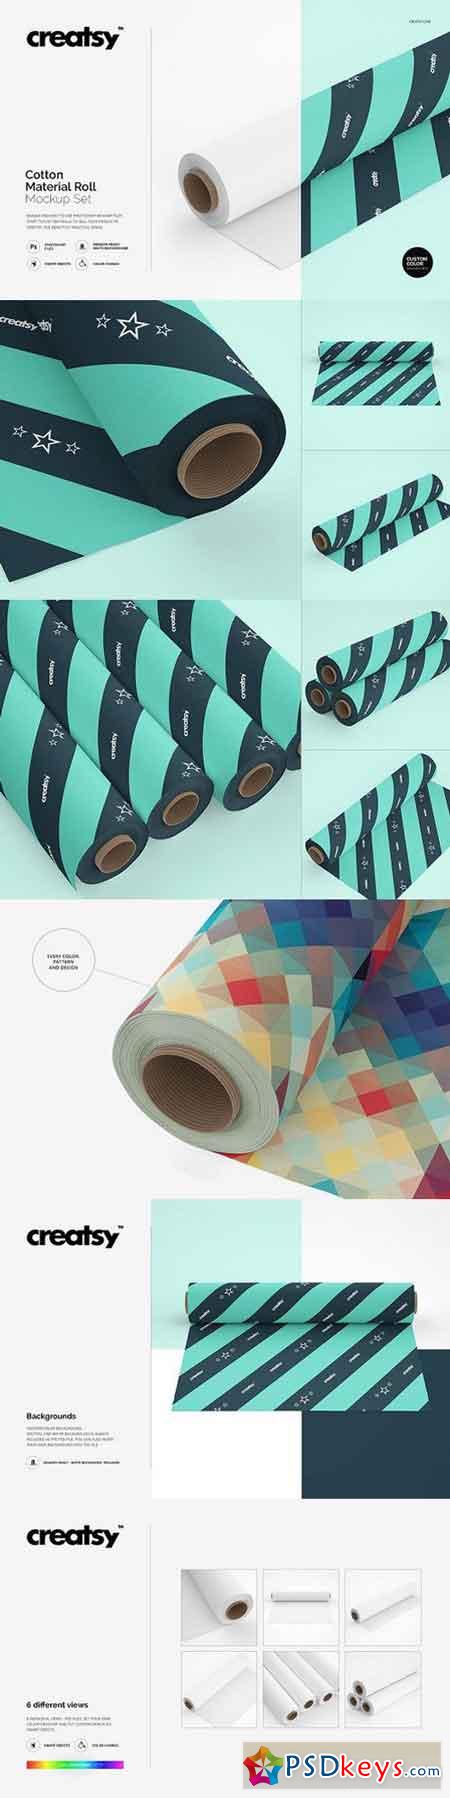 Cotton Material Roll Mockup Set 1249764